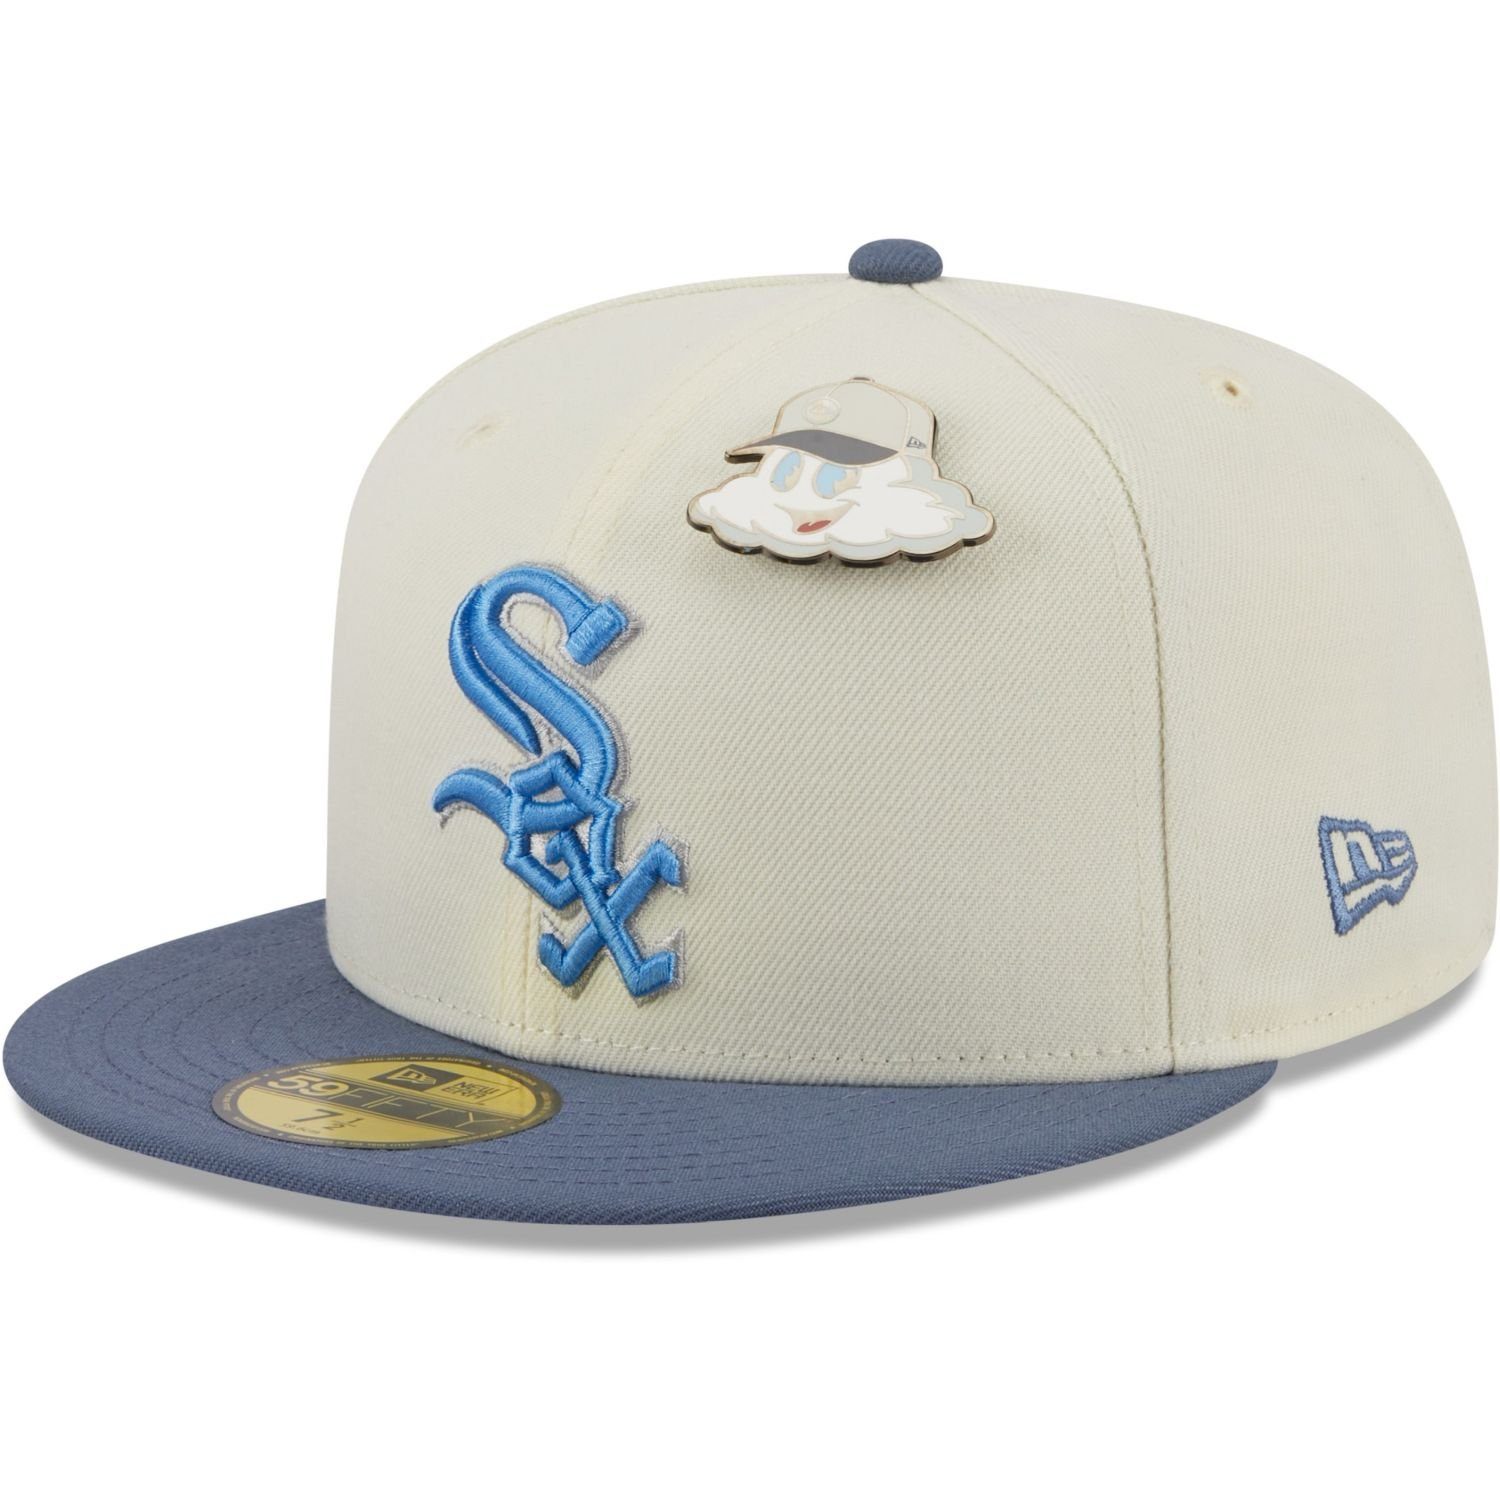 New Era Fitted Cap 59Fifty PIN Sox Chicago ELEMENTS White